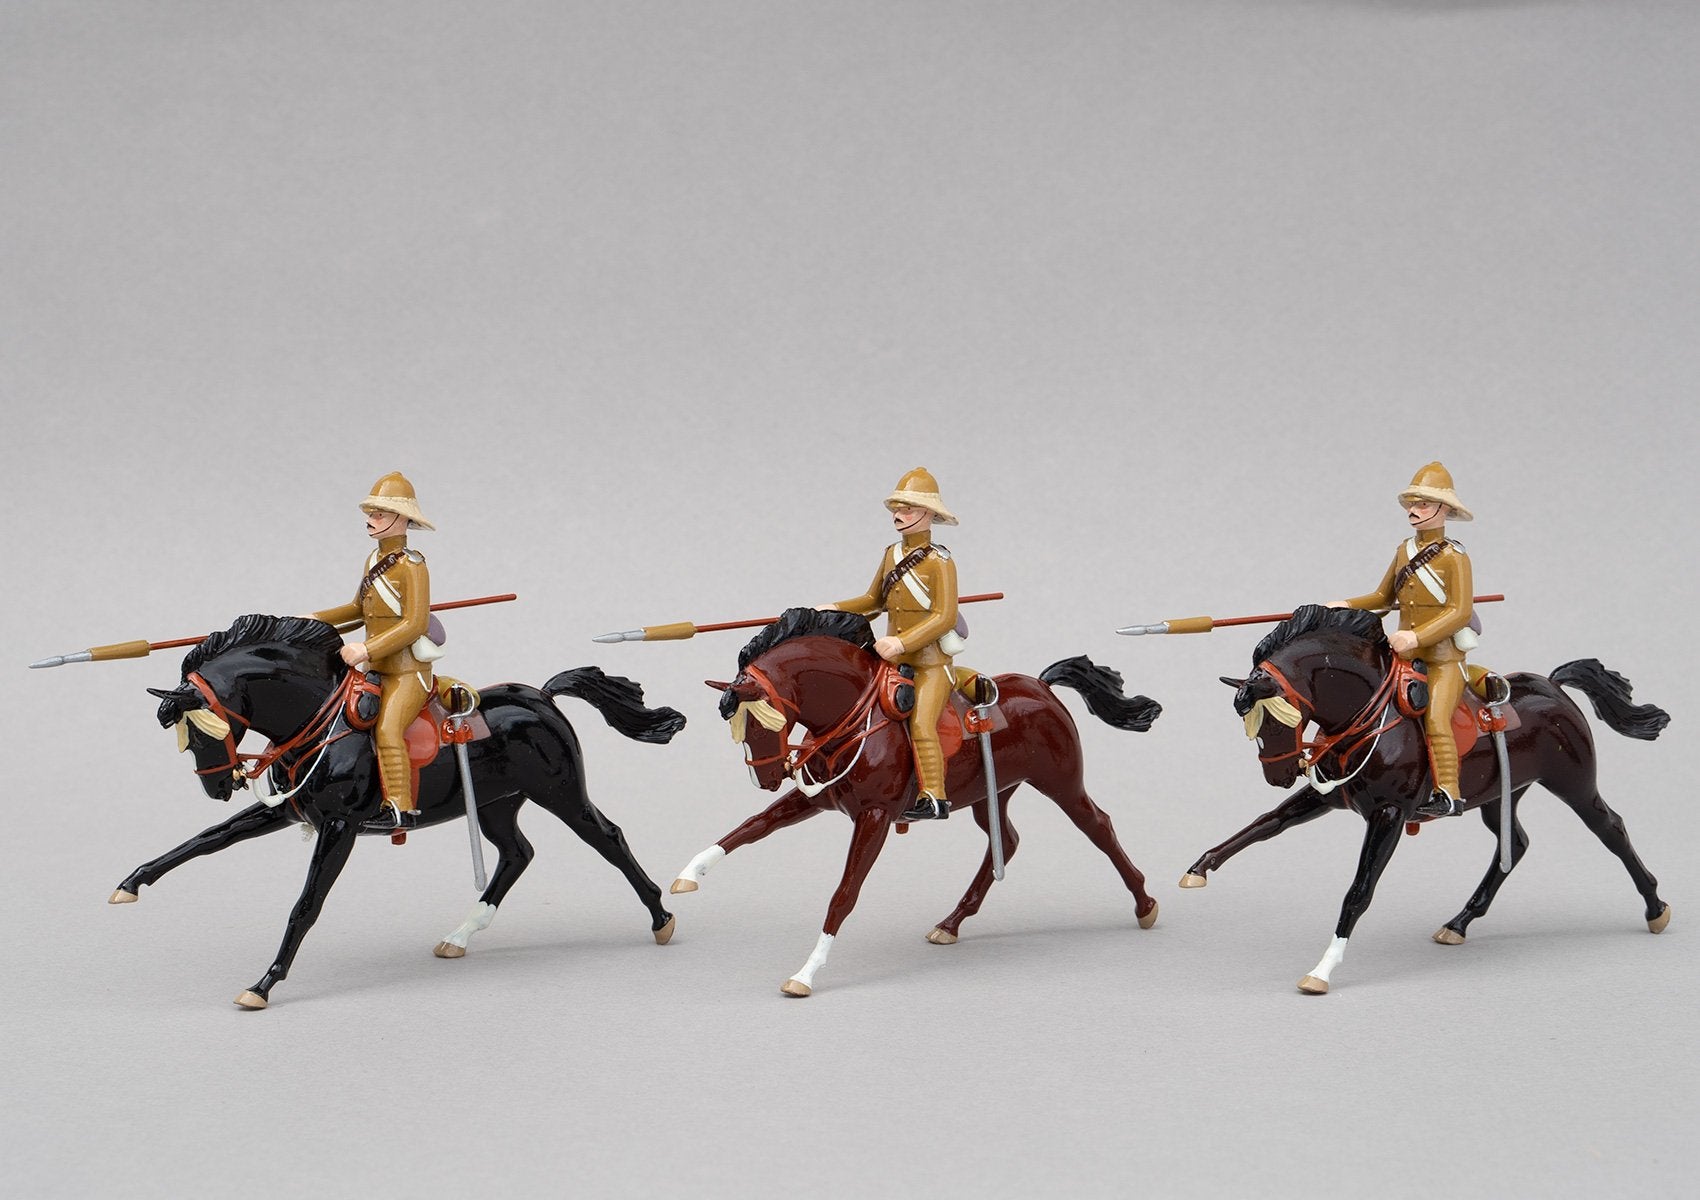 Set 141 21st Lancers, Battle of Omdurman 1898 | British Cavalry | Sudan War | Three mounted khaki cavalry with spears and rifles | Omdurman, Relief of Gordon, Nile River | © Imperial Productions | Sculpt by David Cowe